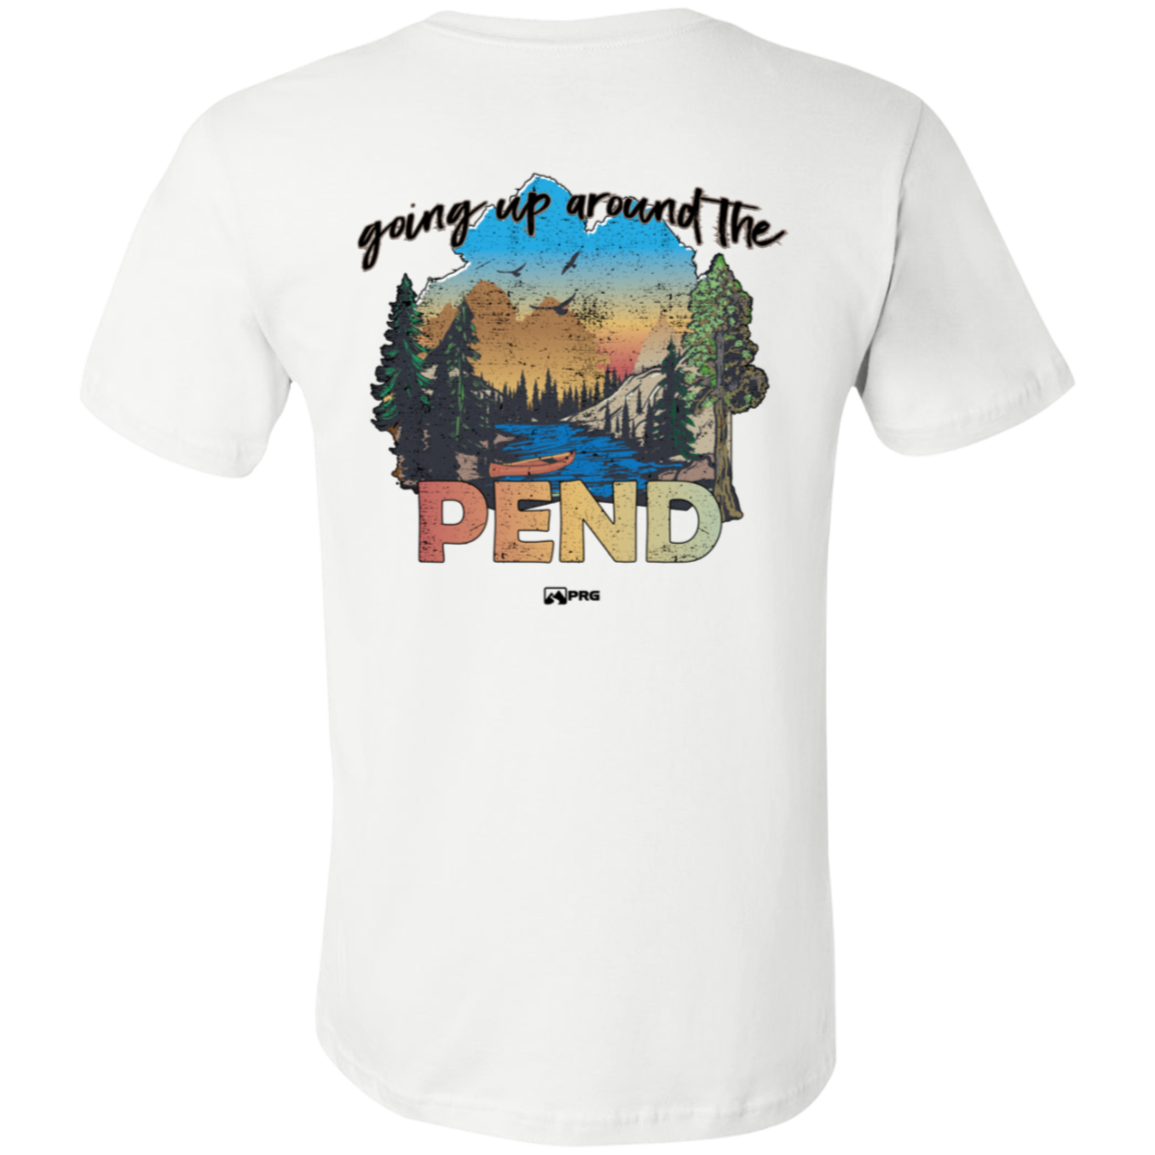 Around the Pend (Front & Back) - Shirt